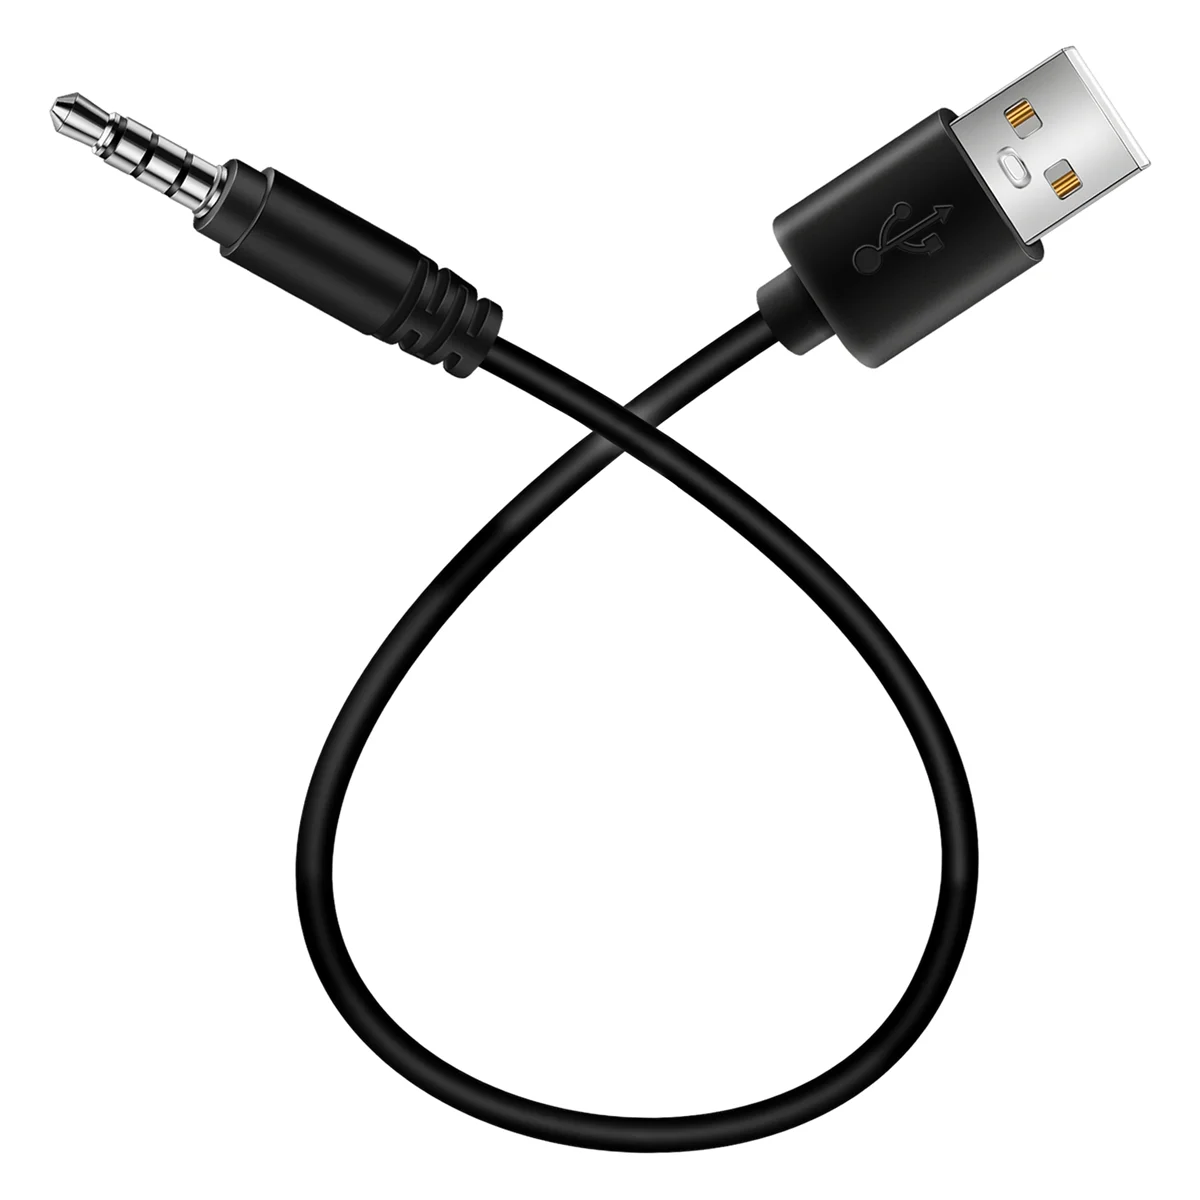 3.5mm Plug AUX Audio Jack to USB 2.0 Male Charger Cable Adapter Cord for Car MP3